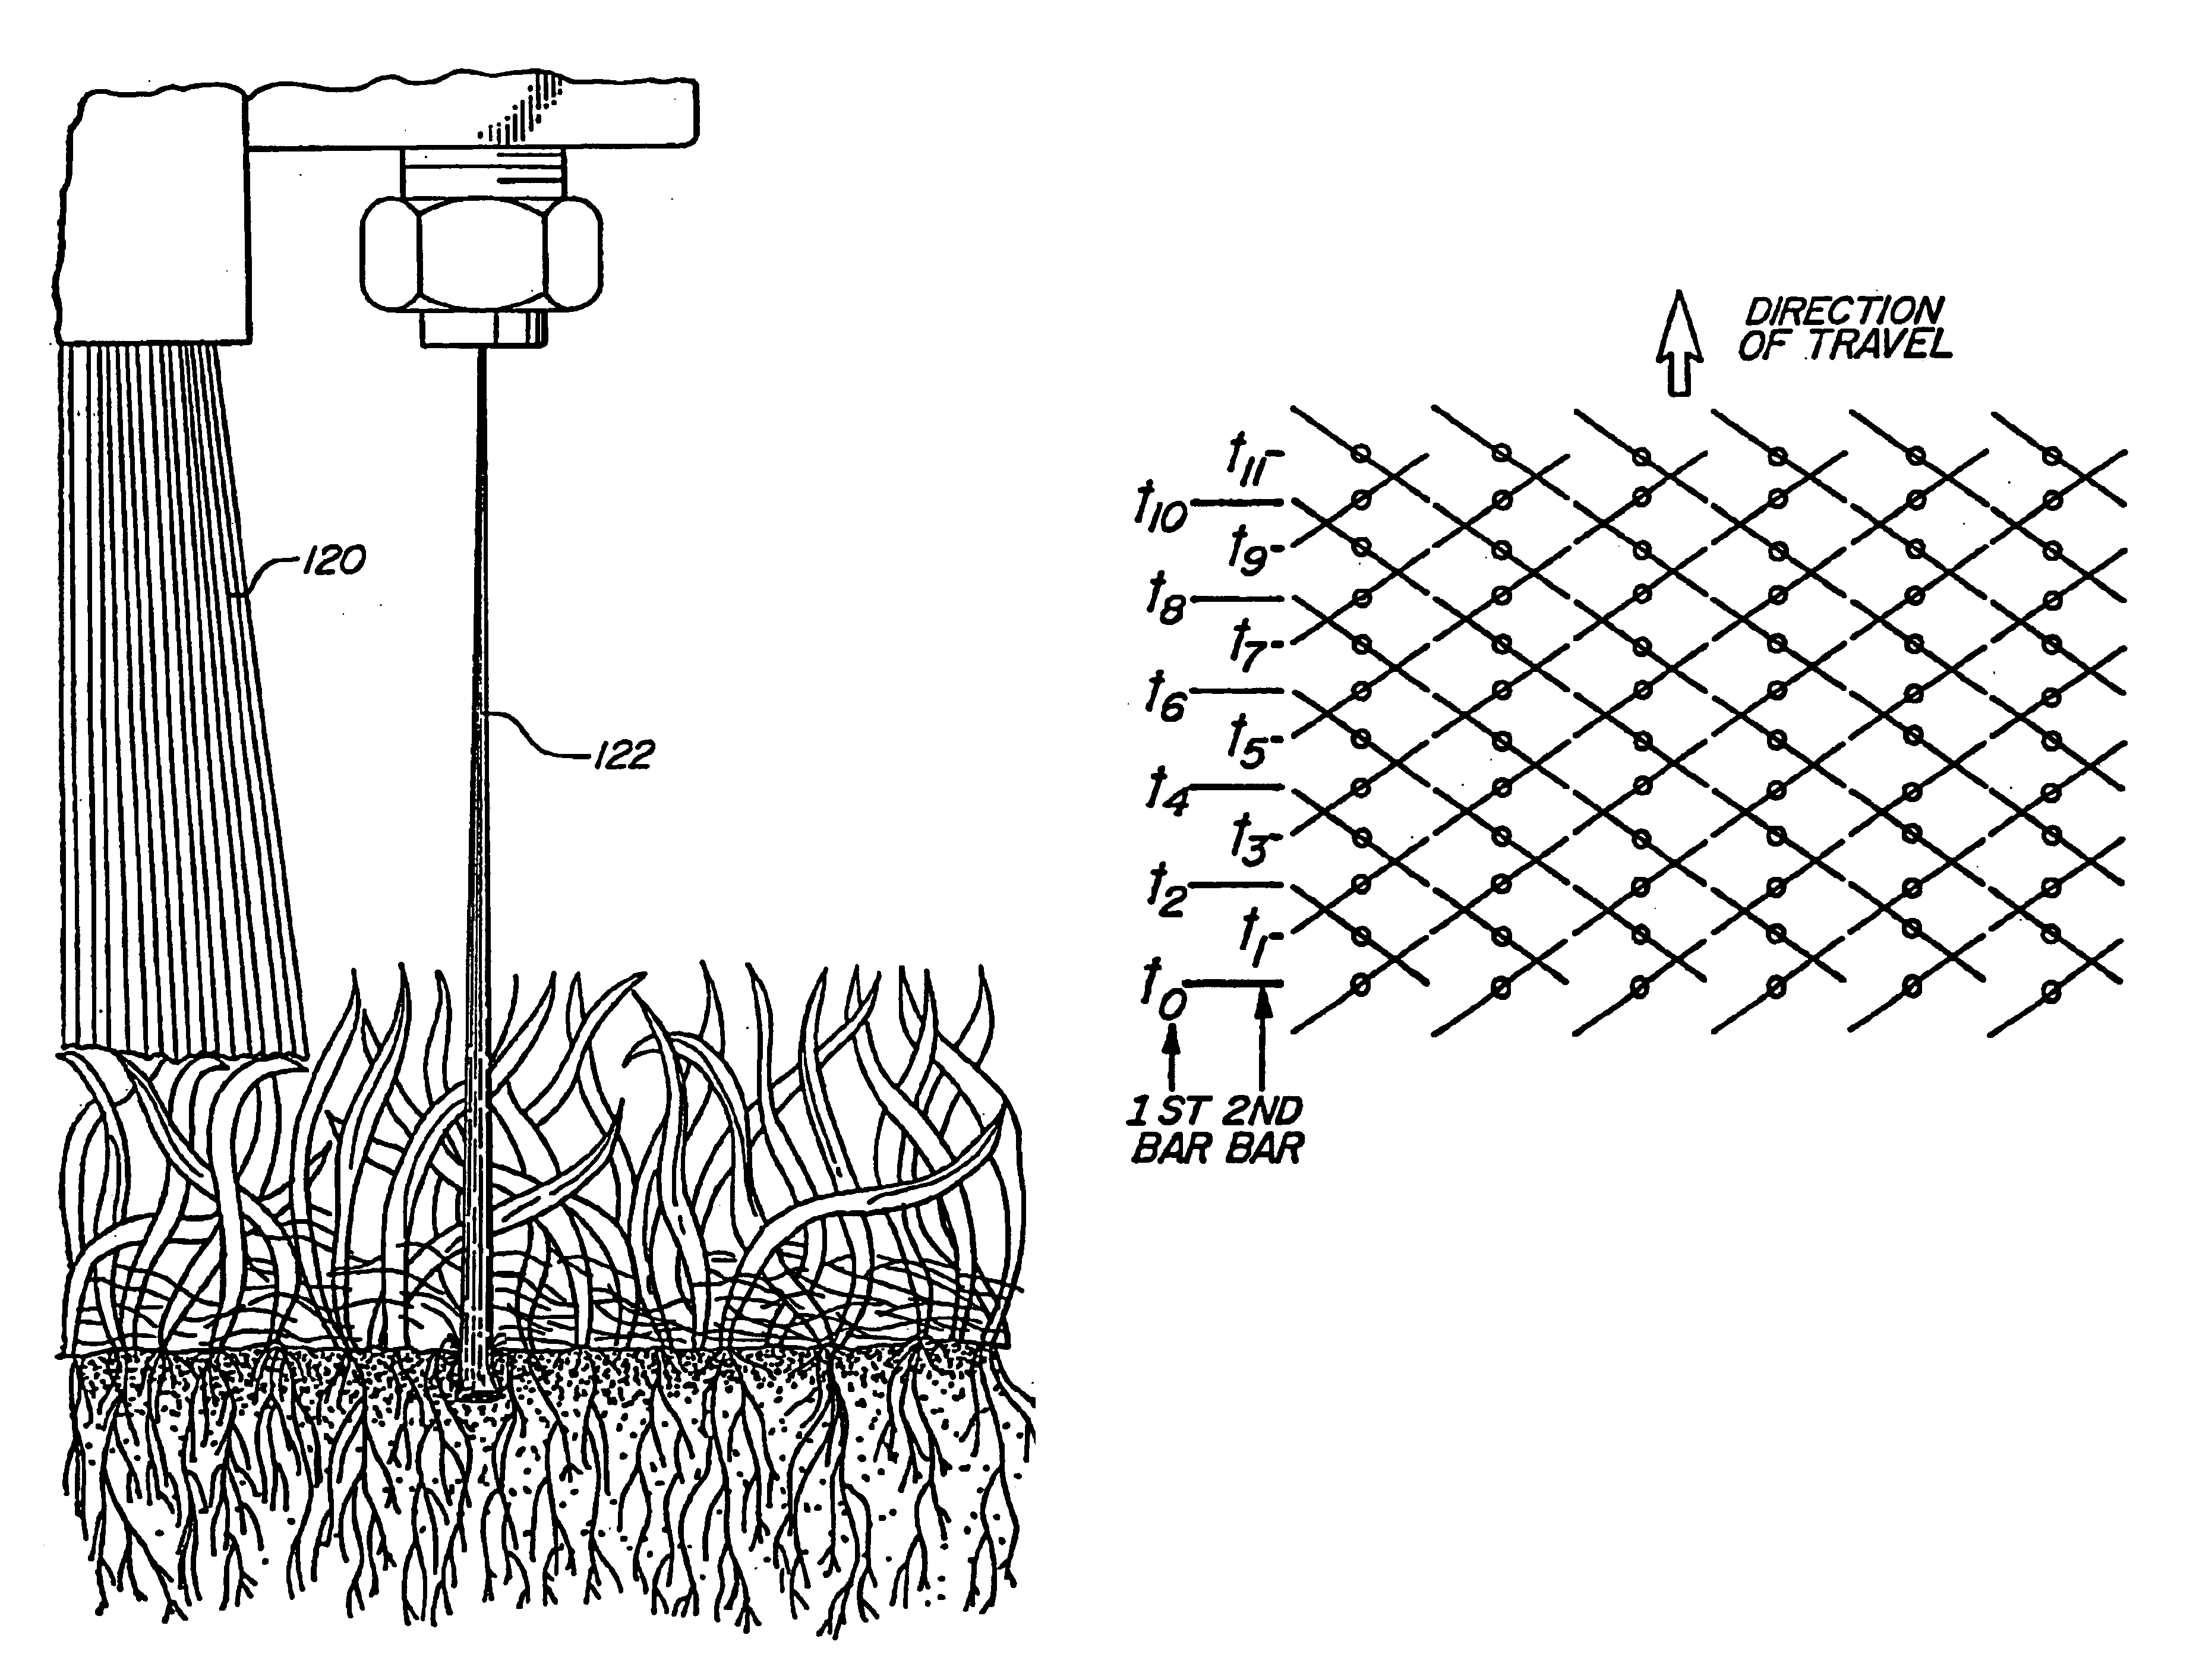 Method and system for high pressure liquid injection of turf seed